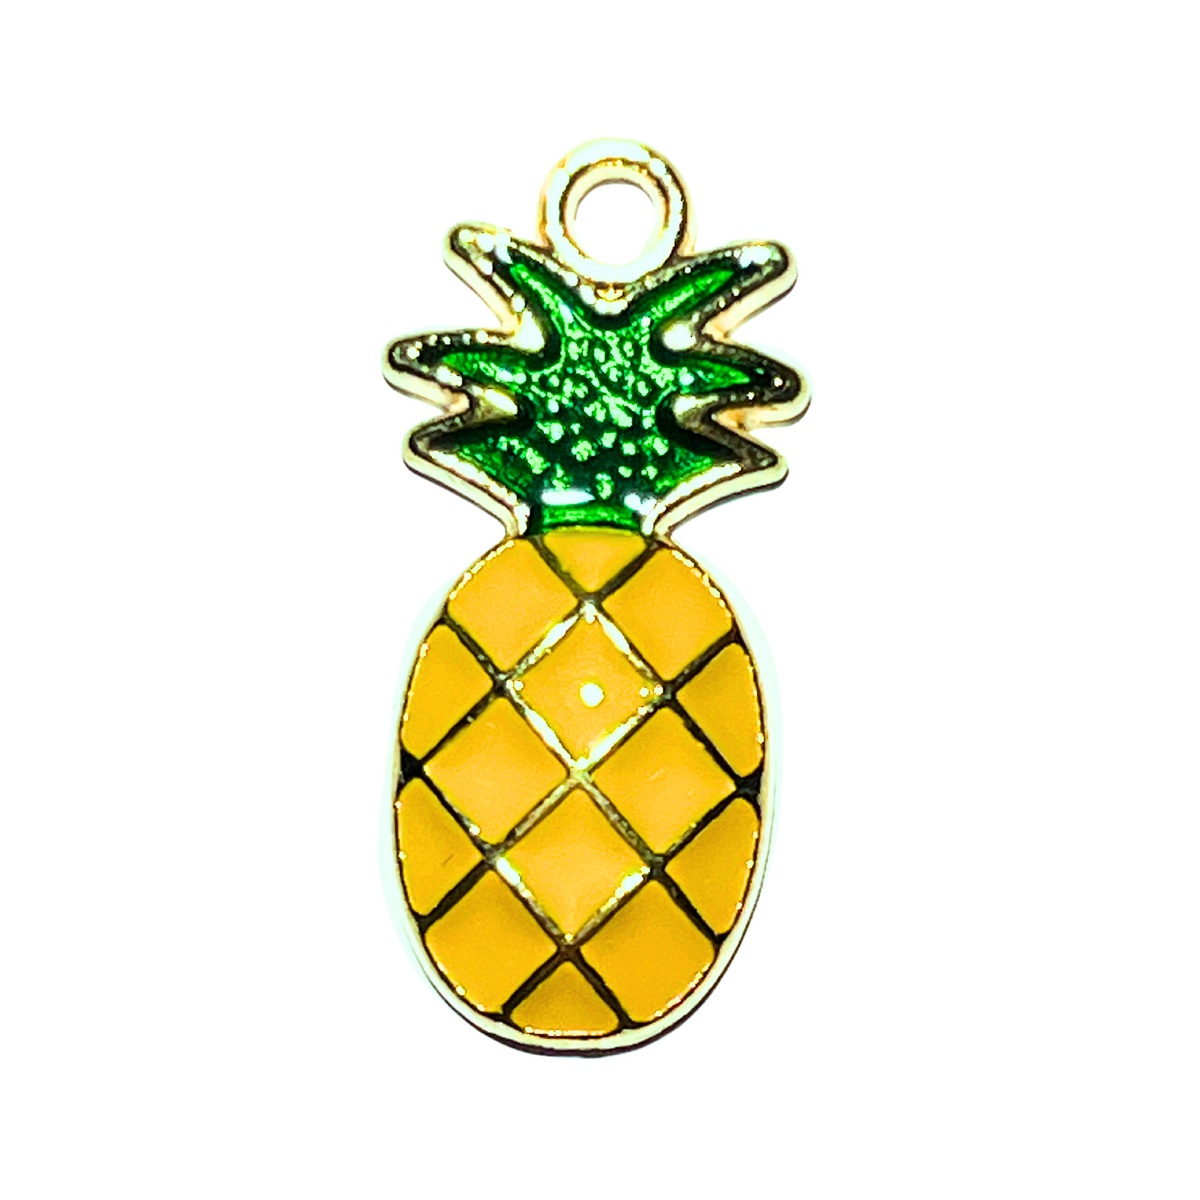 Gold and Enamel Pineapple Pen Charm - pack of 10